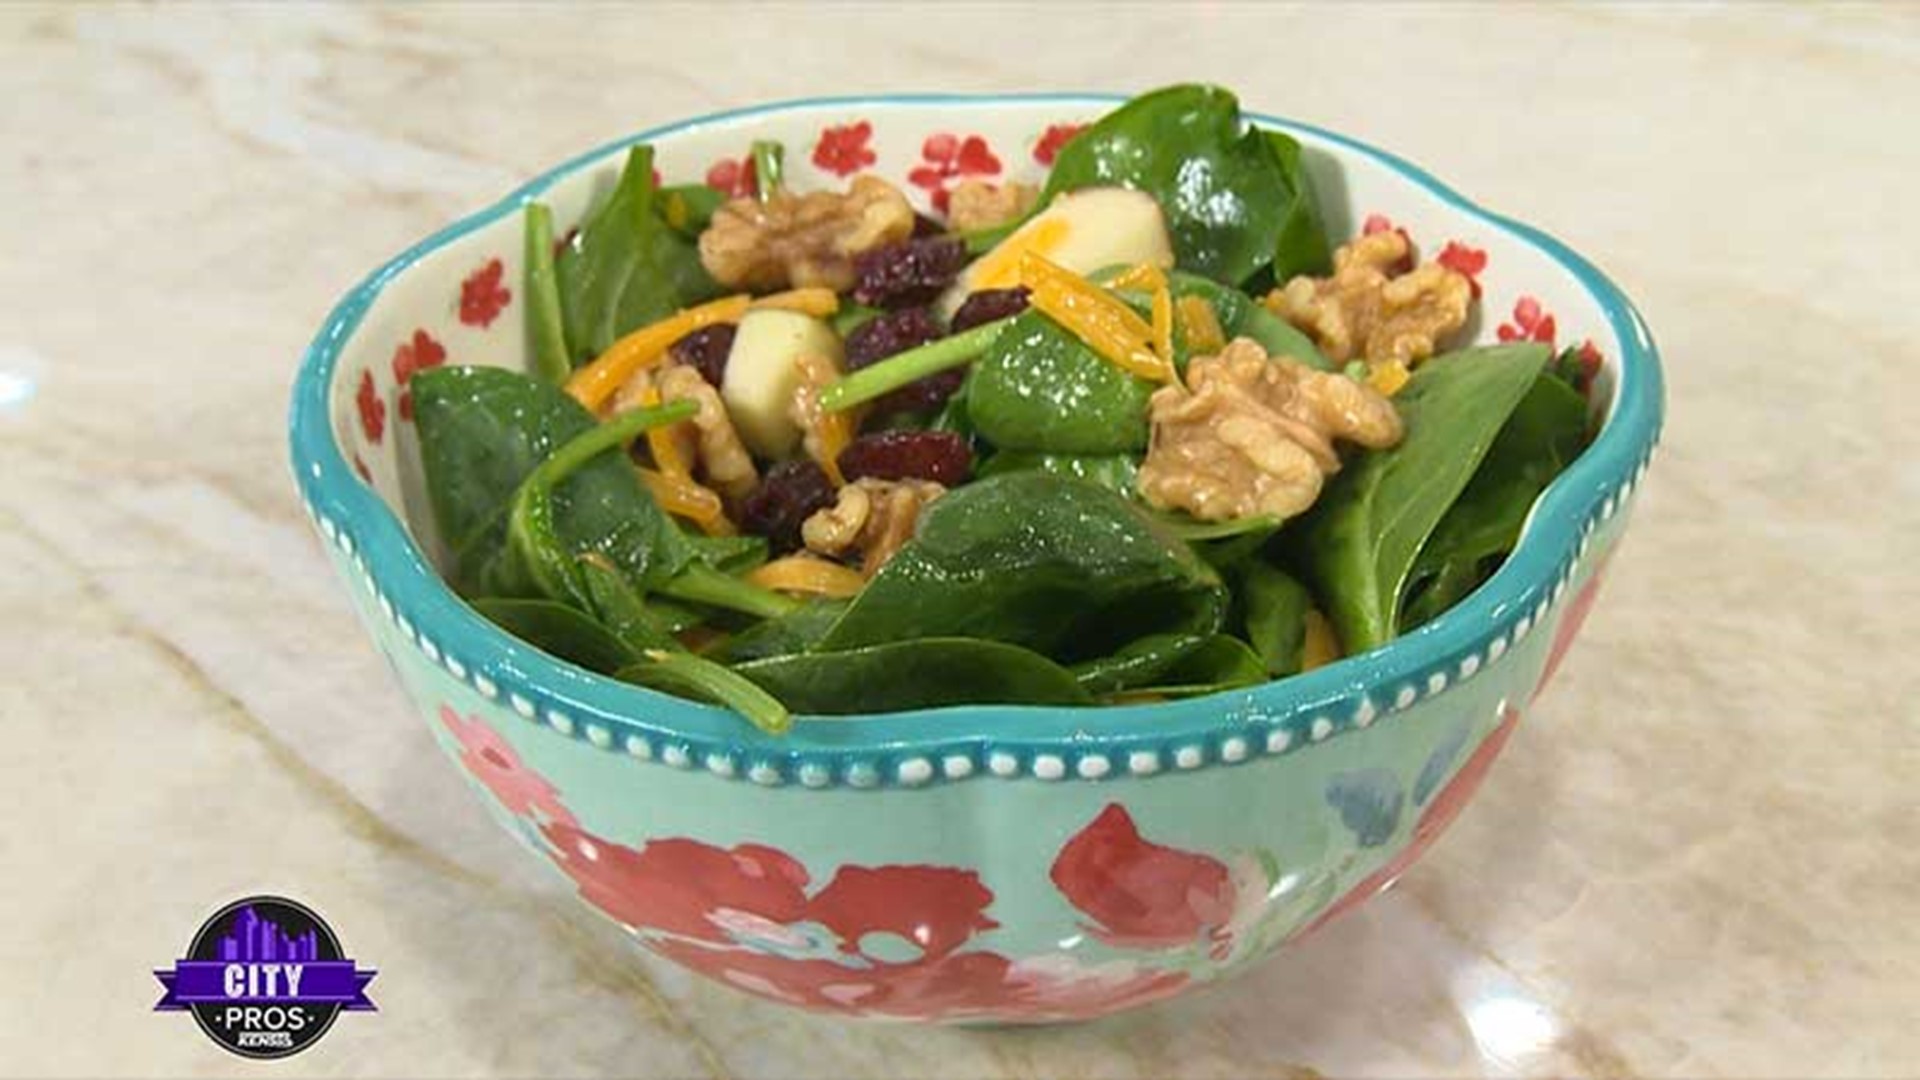 Celebrate mom with a Mother’s Day brunch! The Honey Crisp Apple Spinach Salad is delicious and loaded with health benefits.